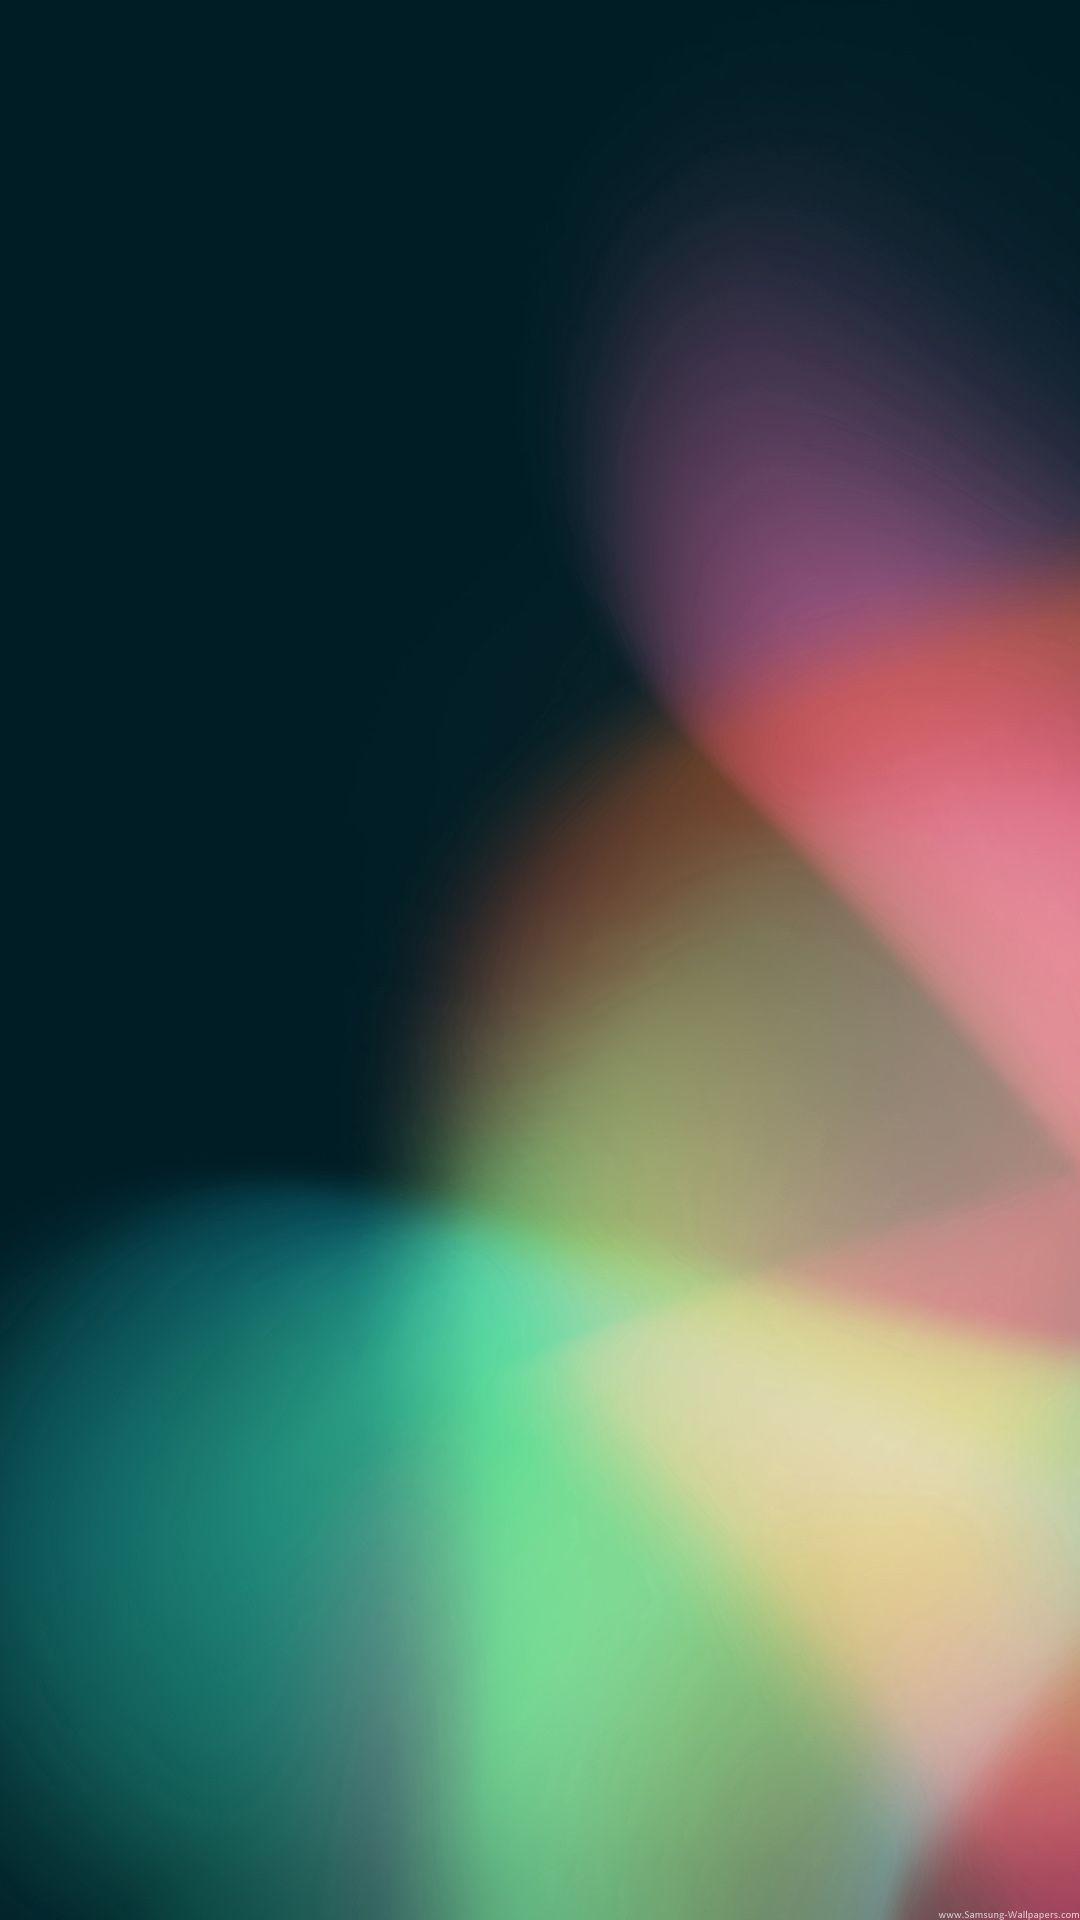 1080 x 1920 · jpeg - Android 7 Wallpapers - Wallpaper Cave